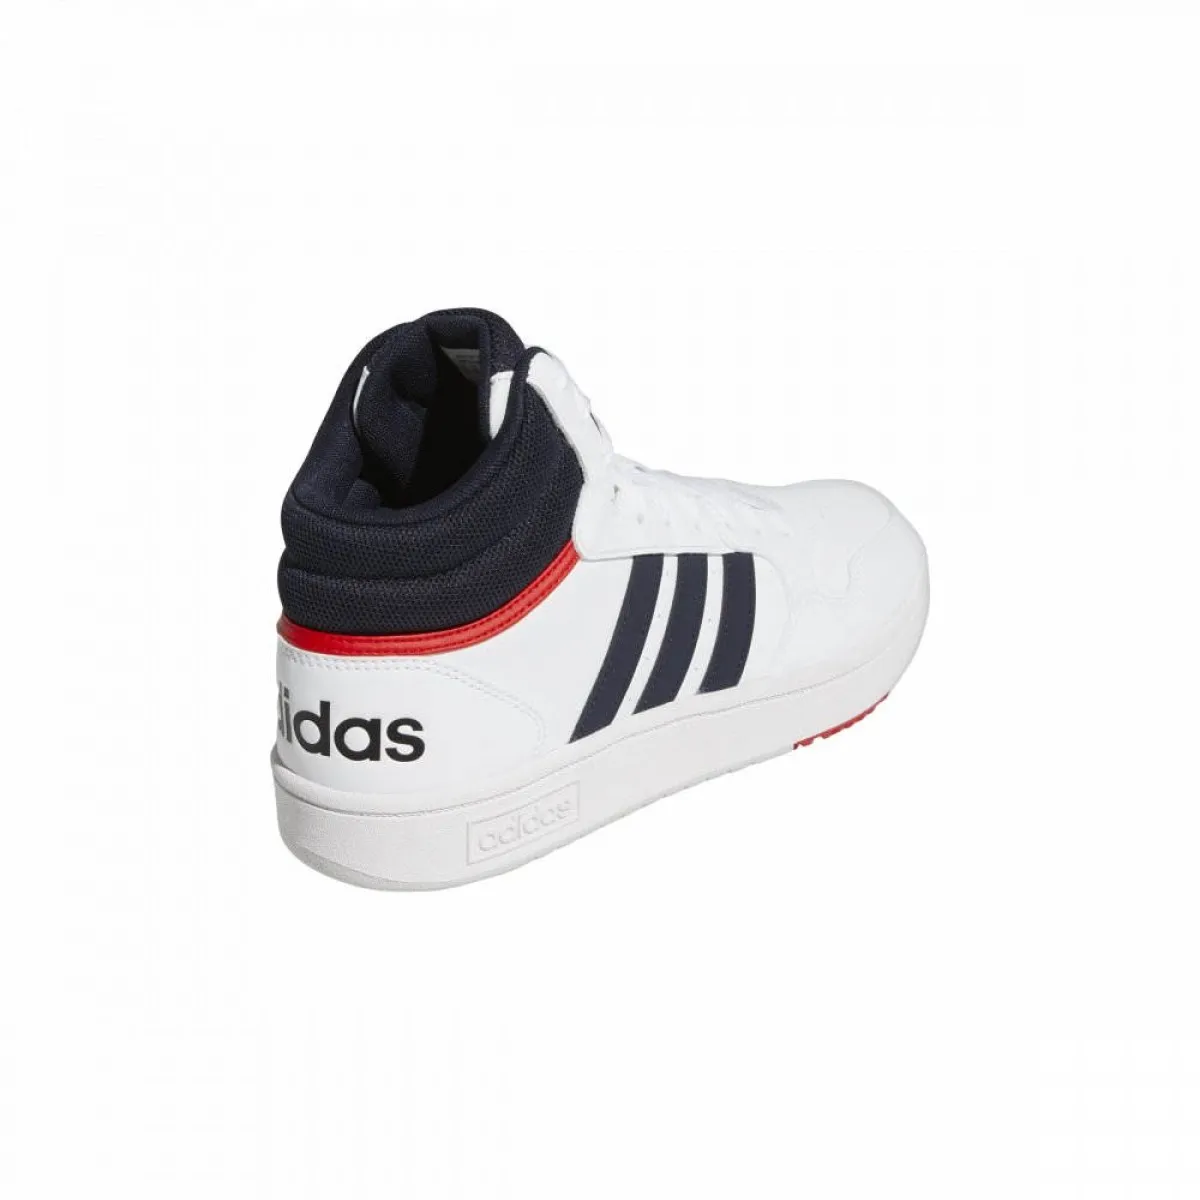 adidas half-high boot Hoops 3.0 white with black stripes